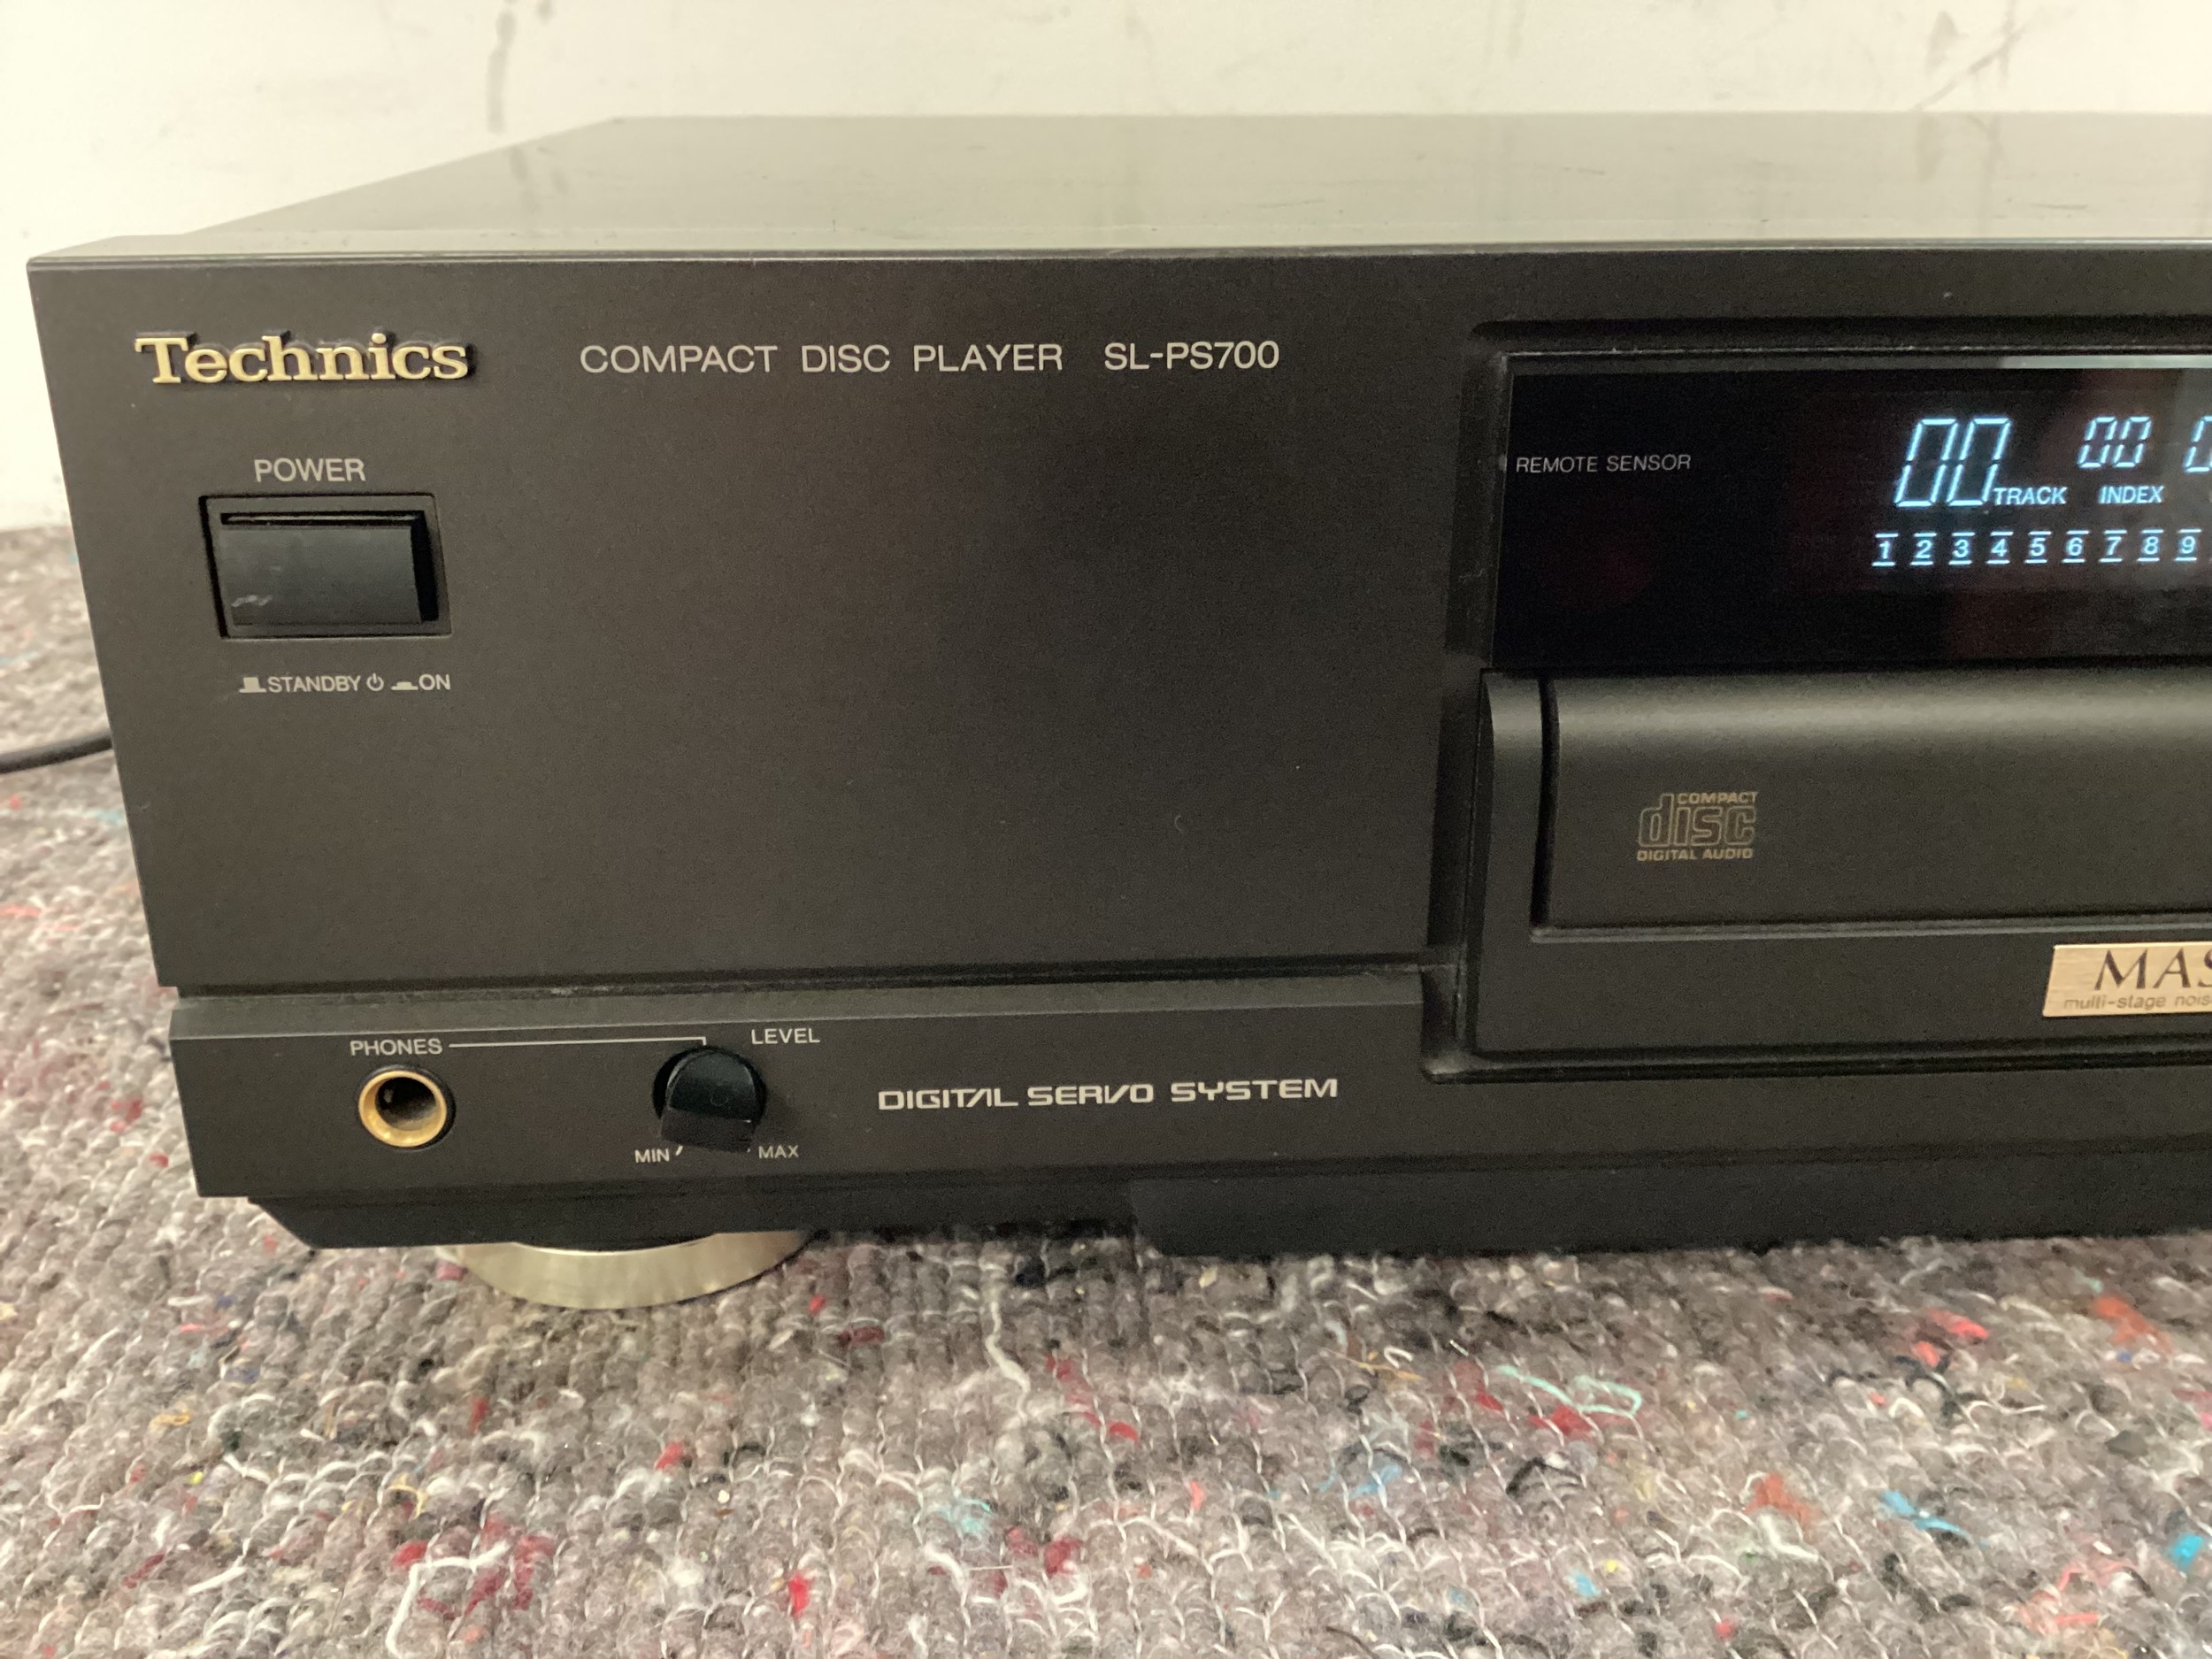 TECHNICS COMPACT DISC PLAYER. This unit powers up when plugged in and is model No. SL-PS700. - Image 3 of 4